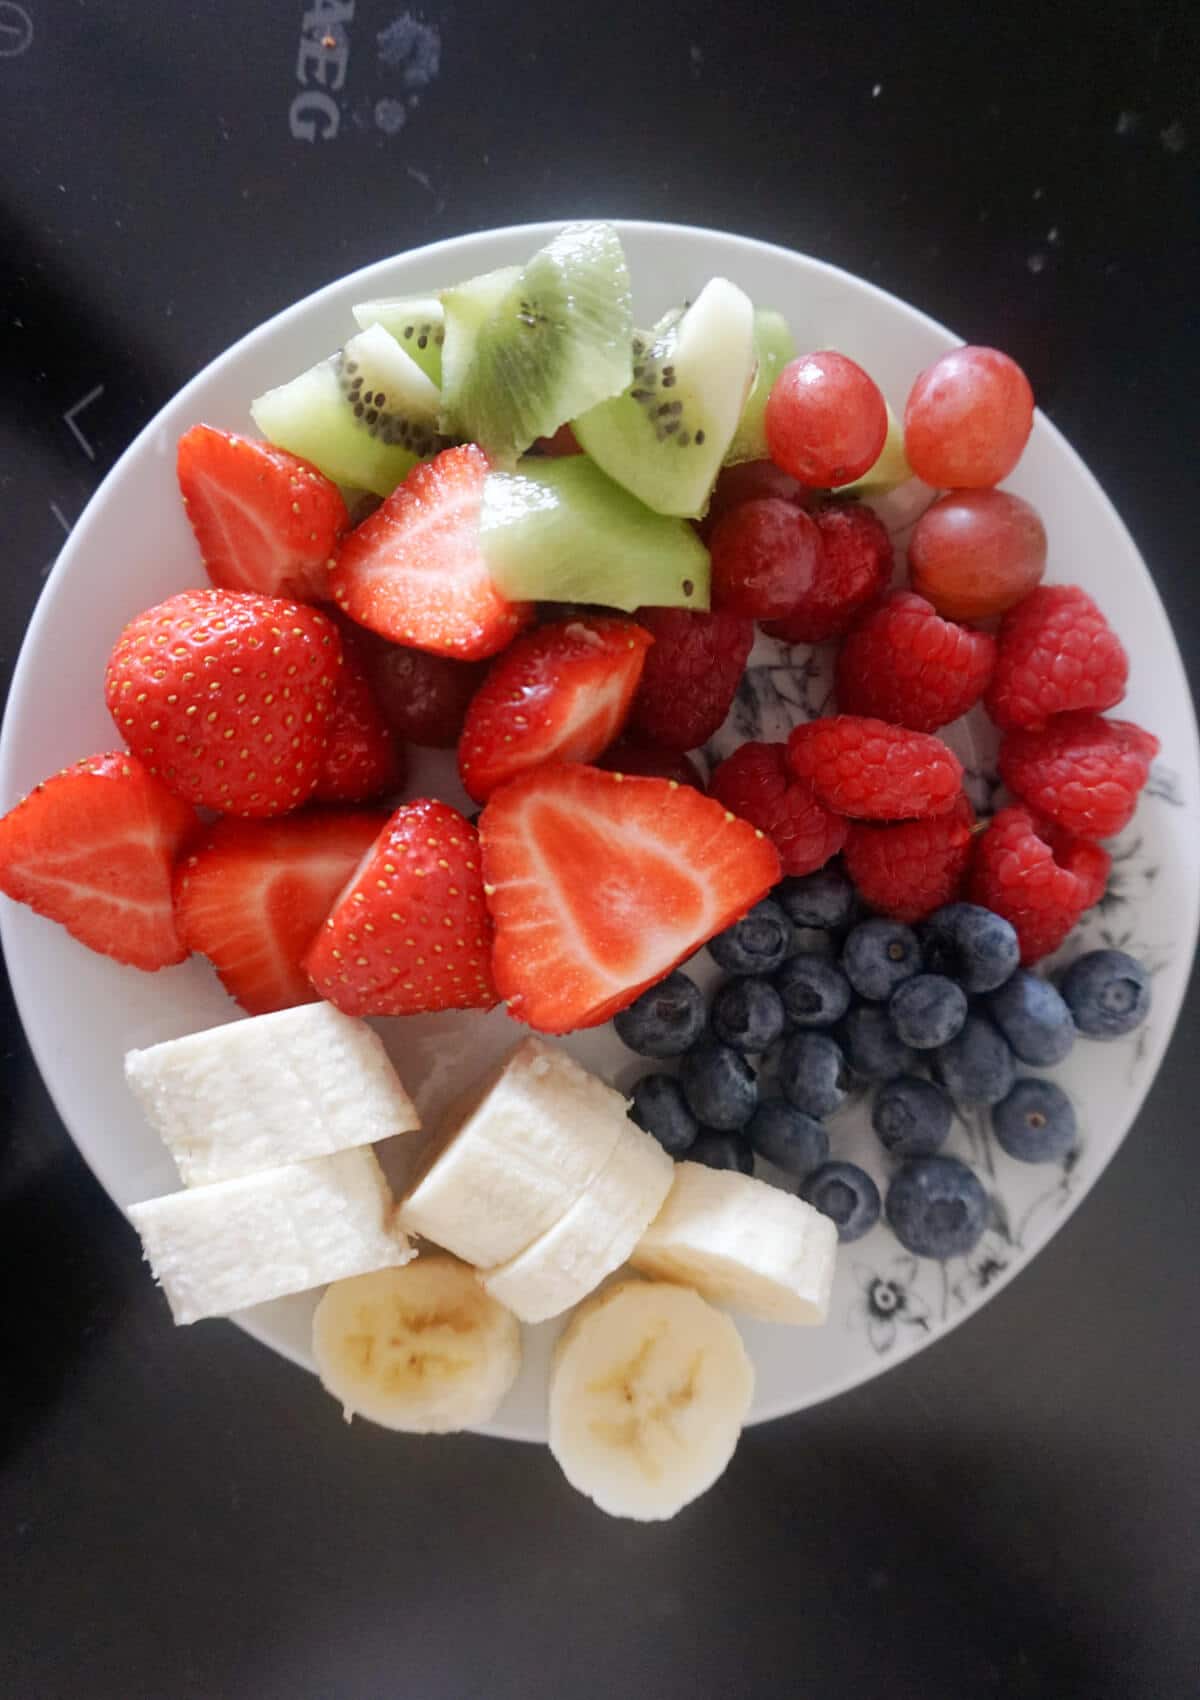 Overhead shot of a plate with chunks of fresh berries, bananas and kiwis